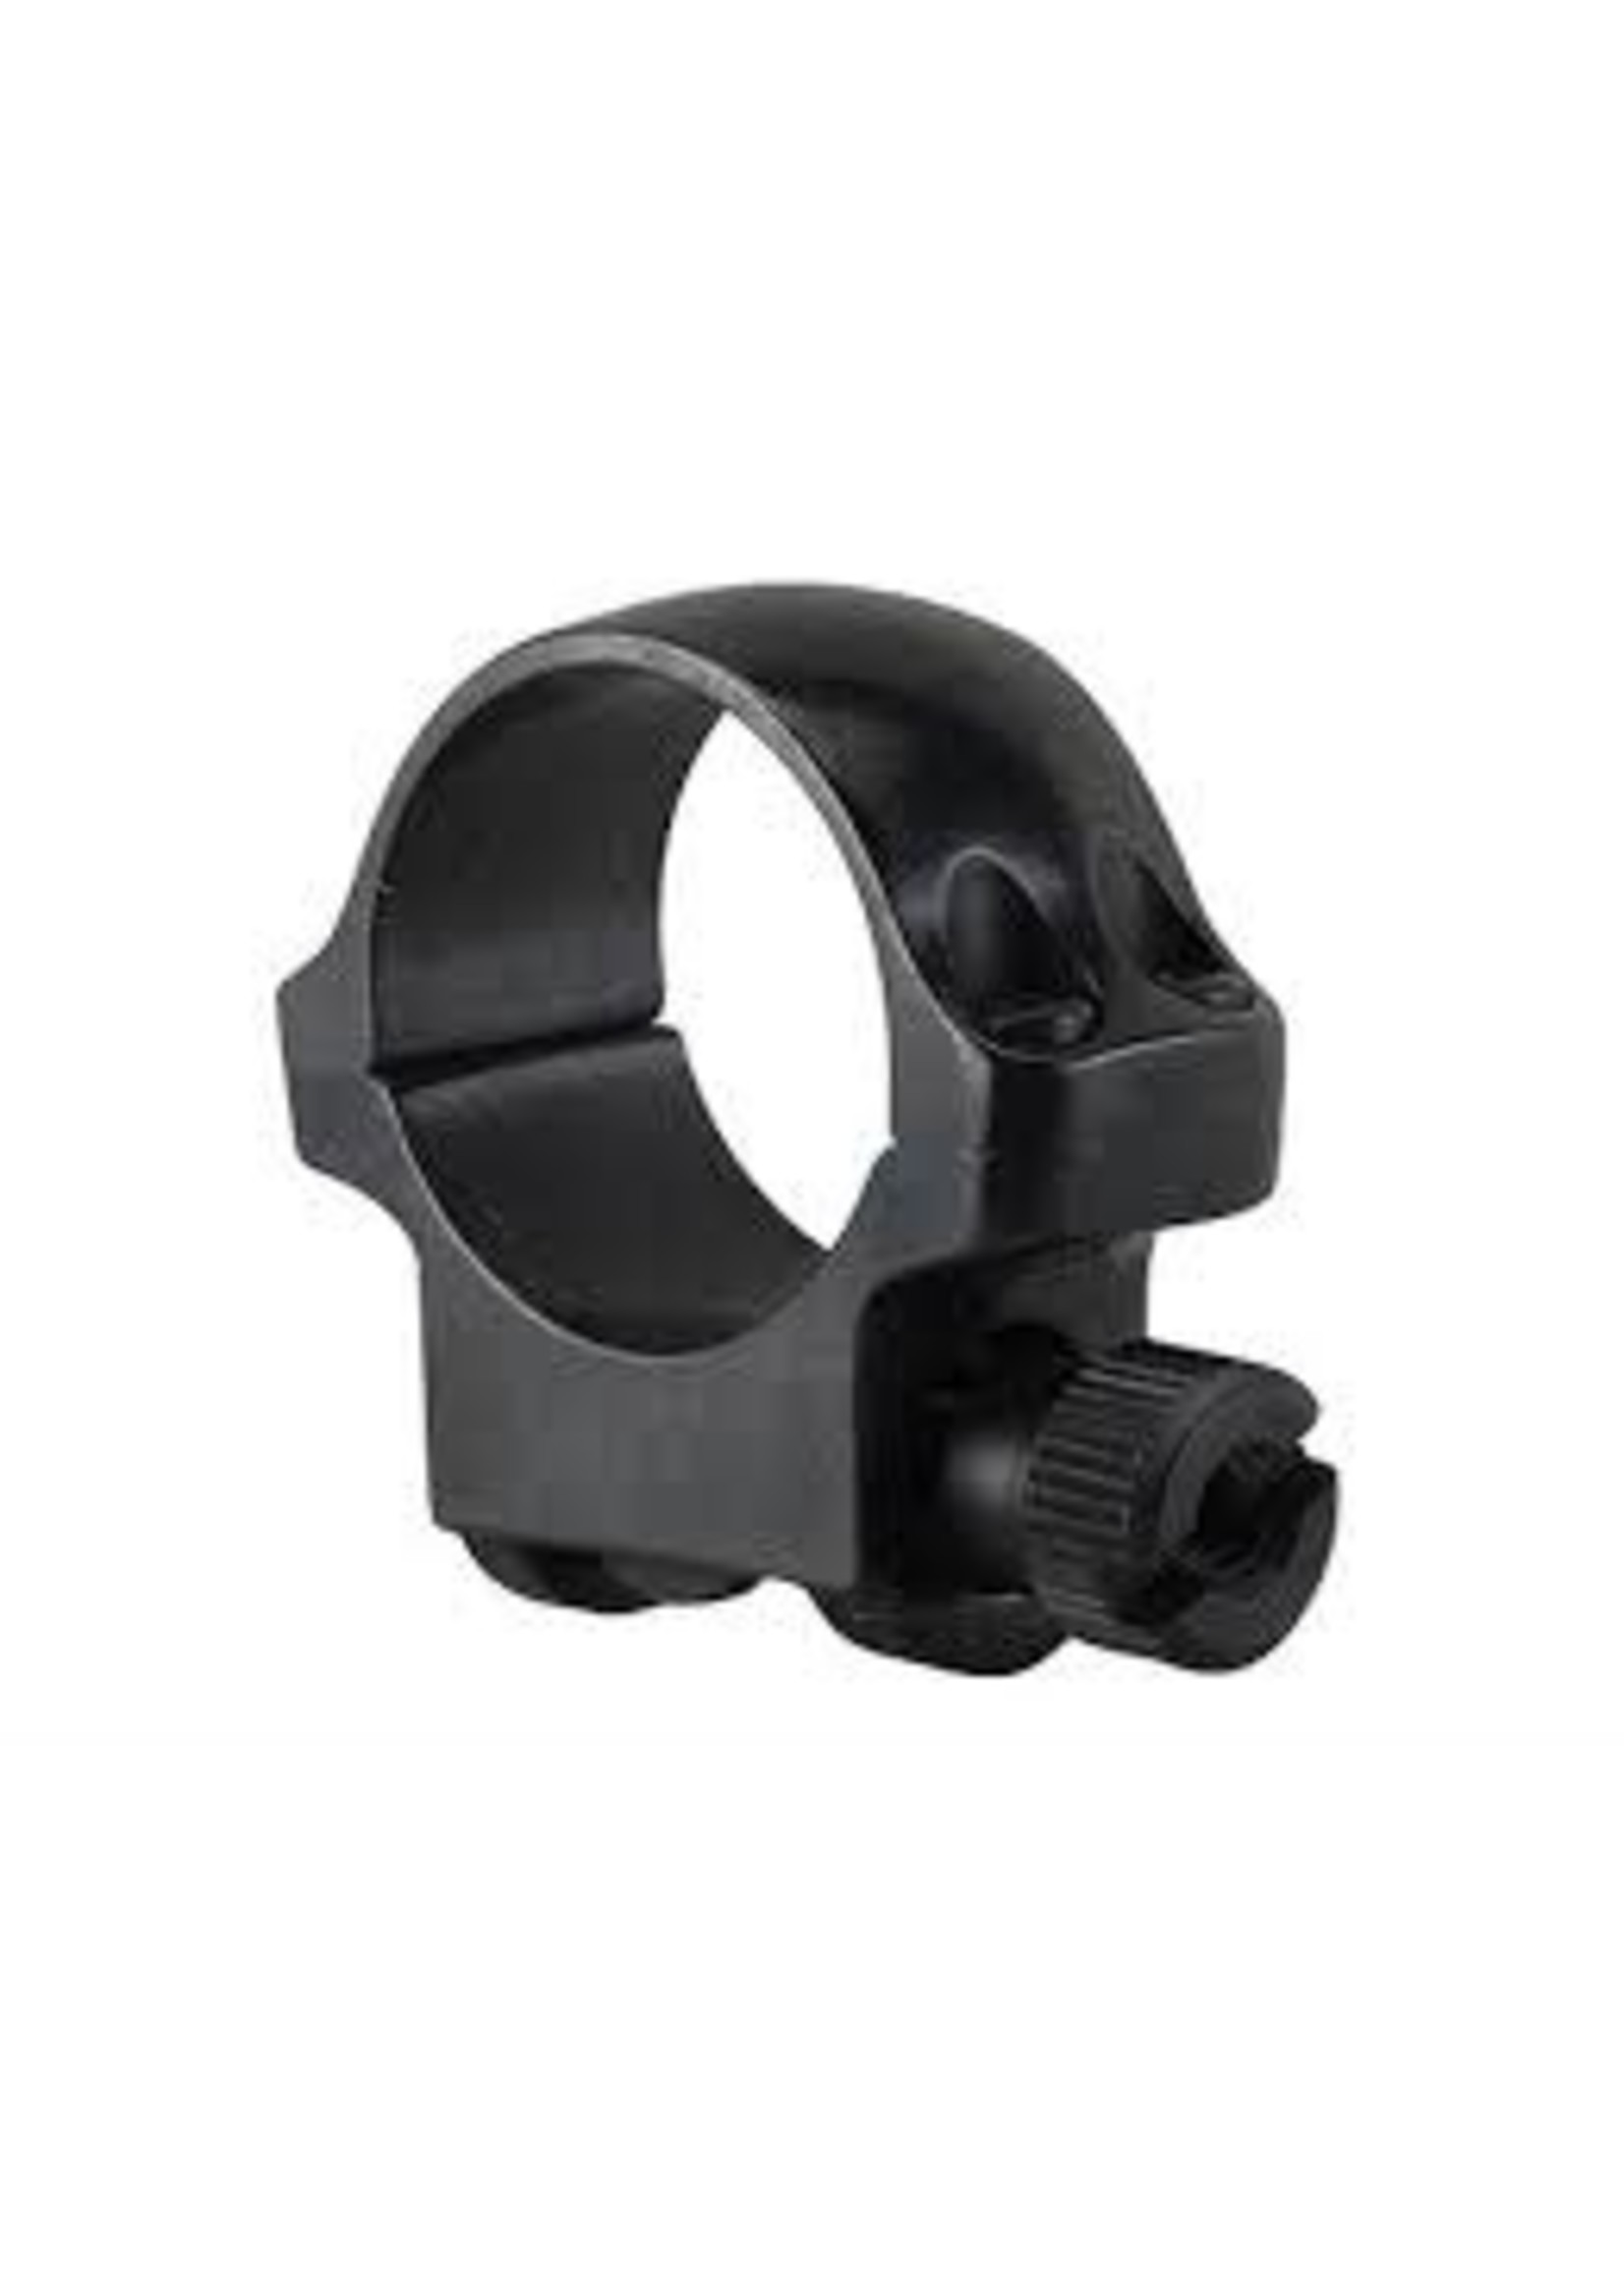 Weaver RUGER SCOPE RING #3 SILVER